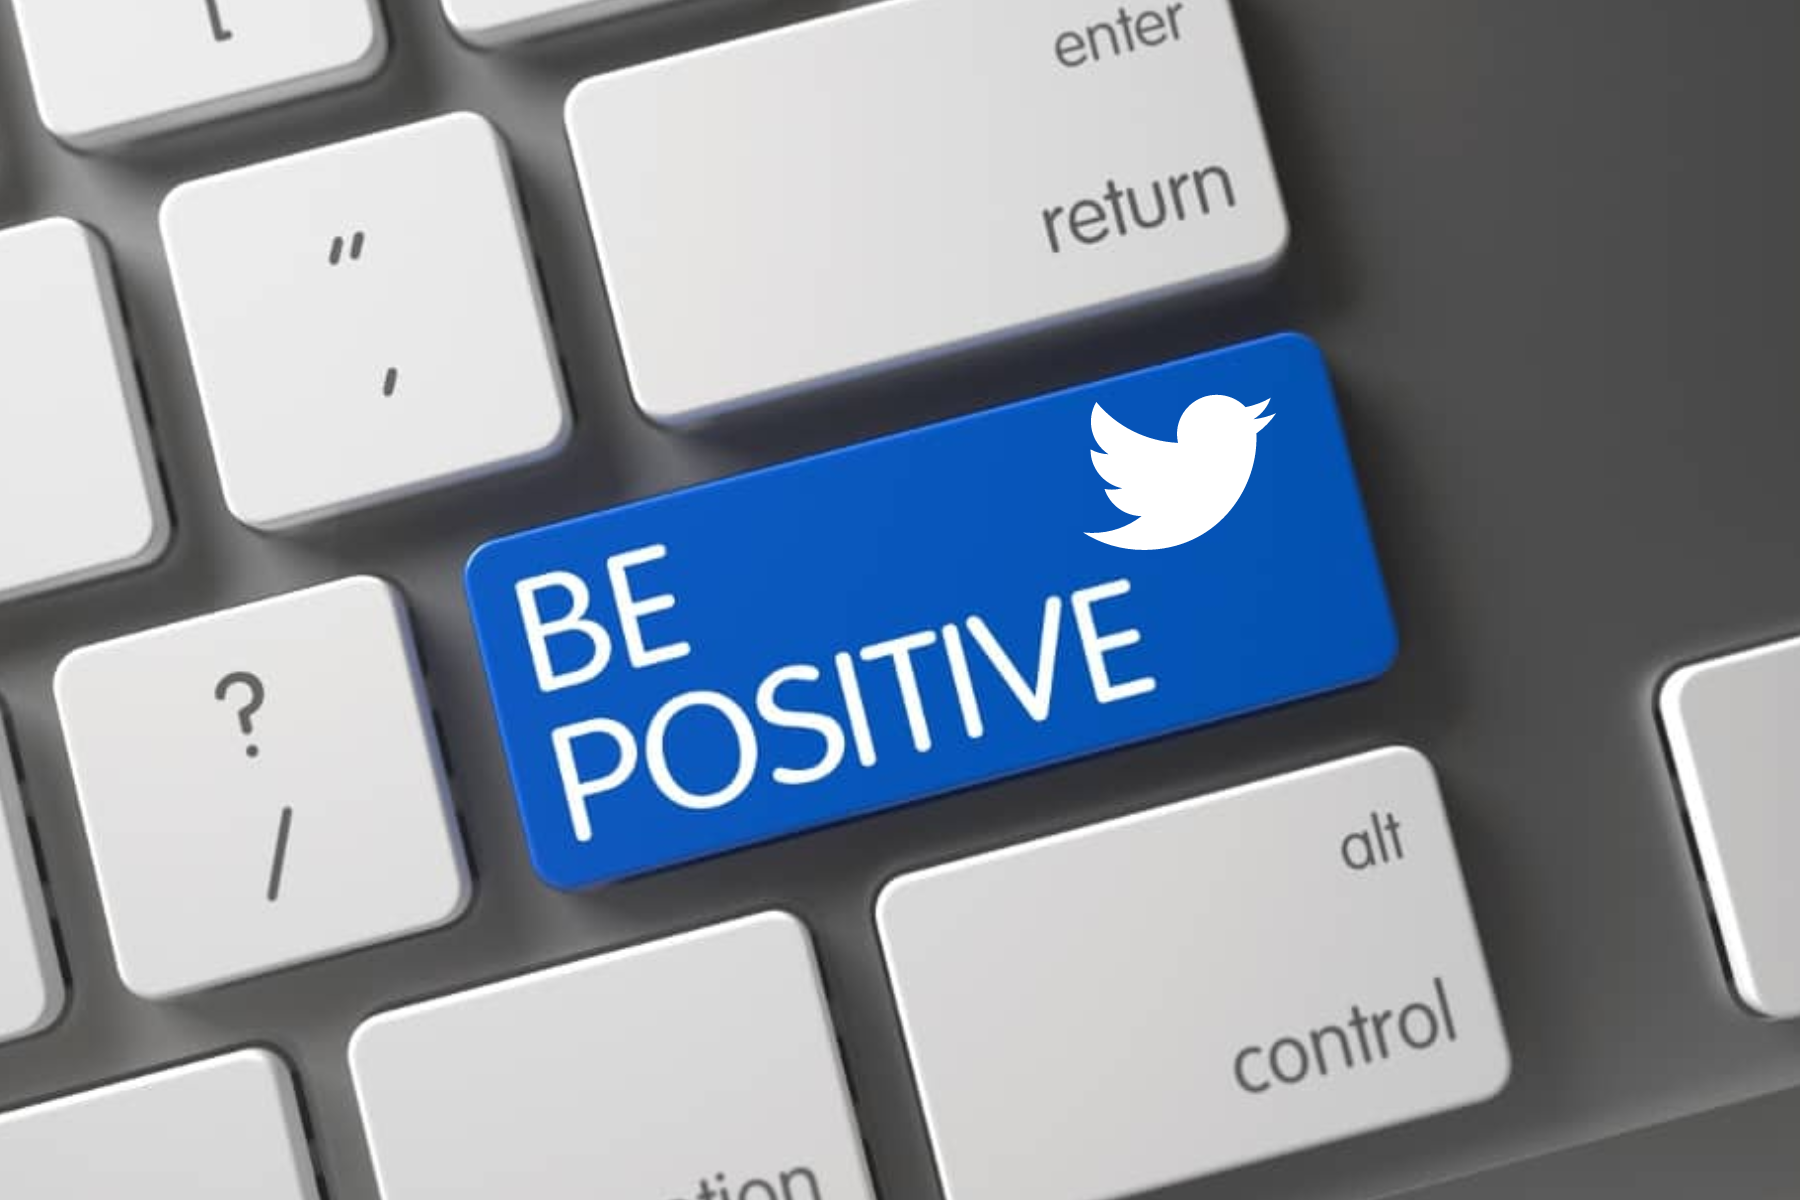 A keyboard with a 'Be Positive' button and the Twitter logo